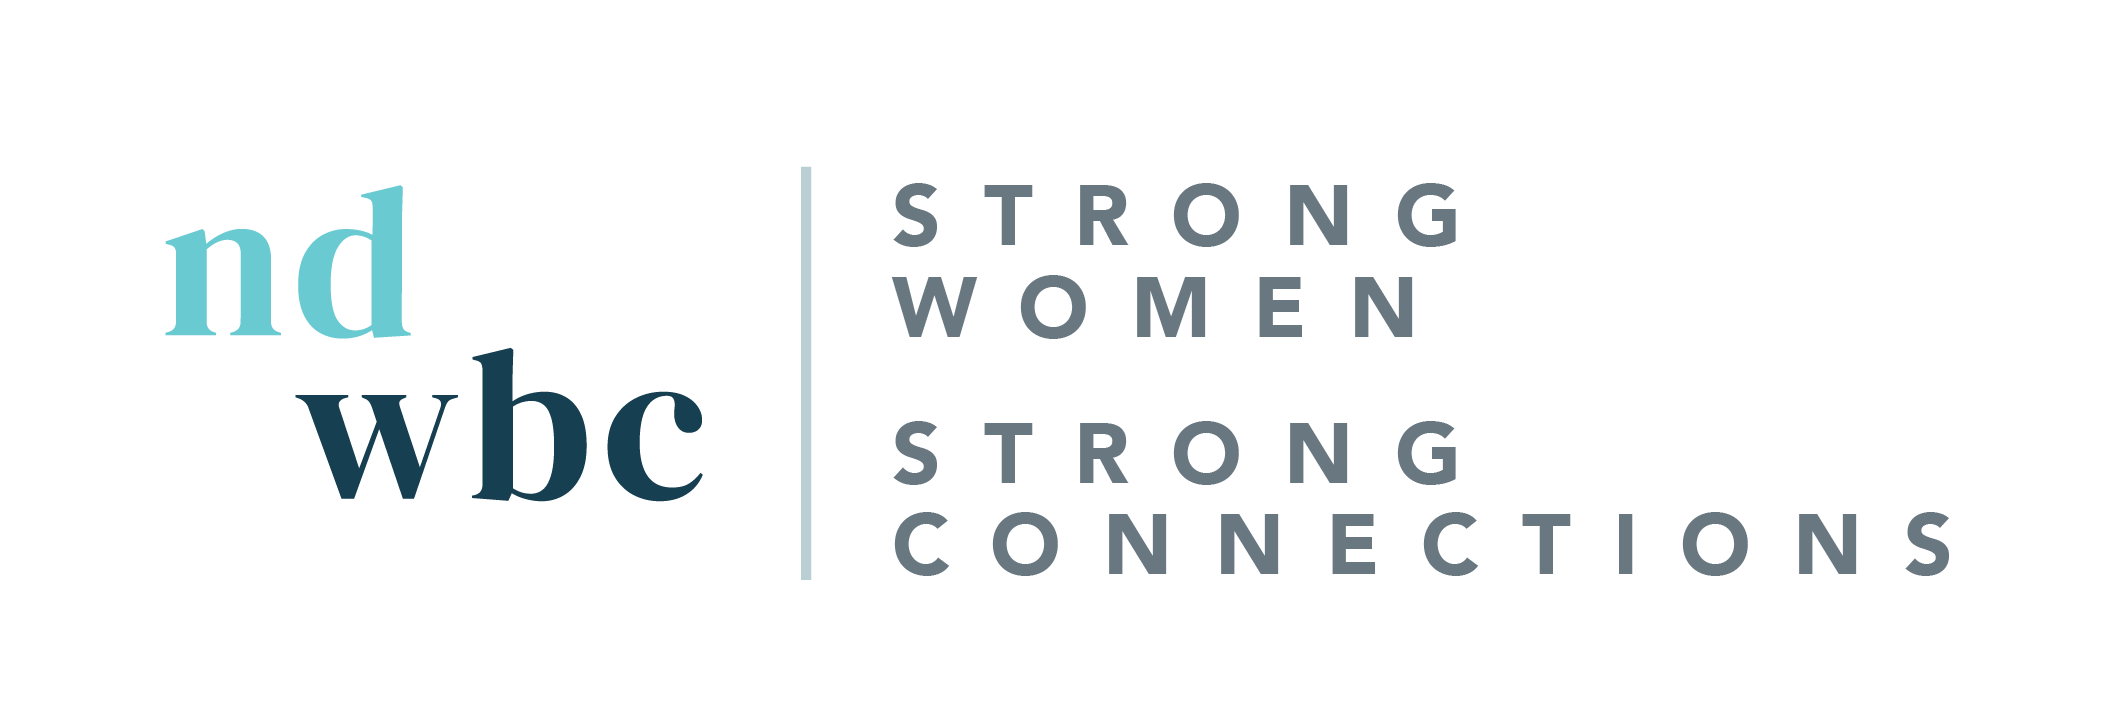 NDWBC_Acronym 1_Strong Women Strong Connections_Color_Color.png